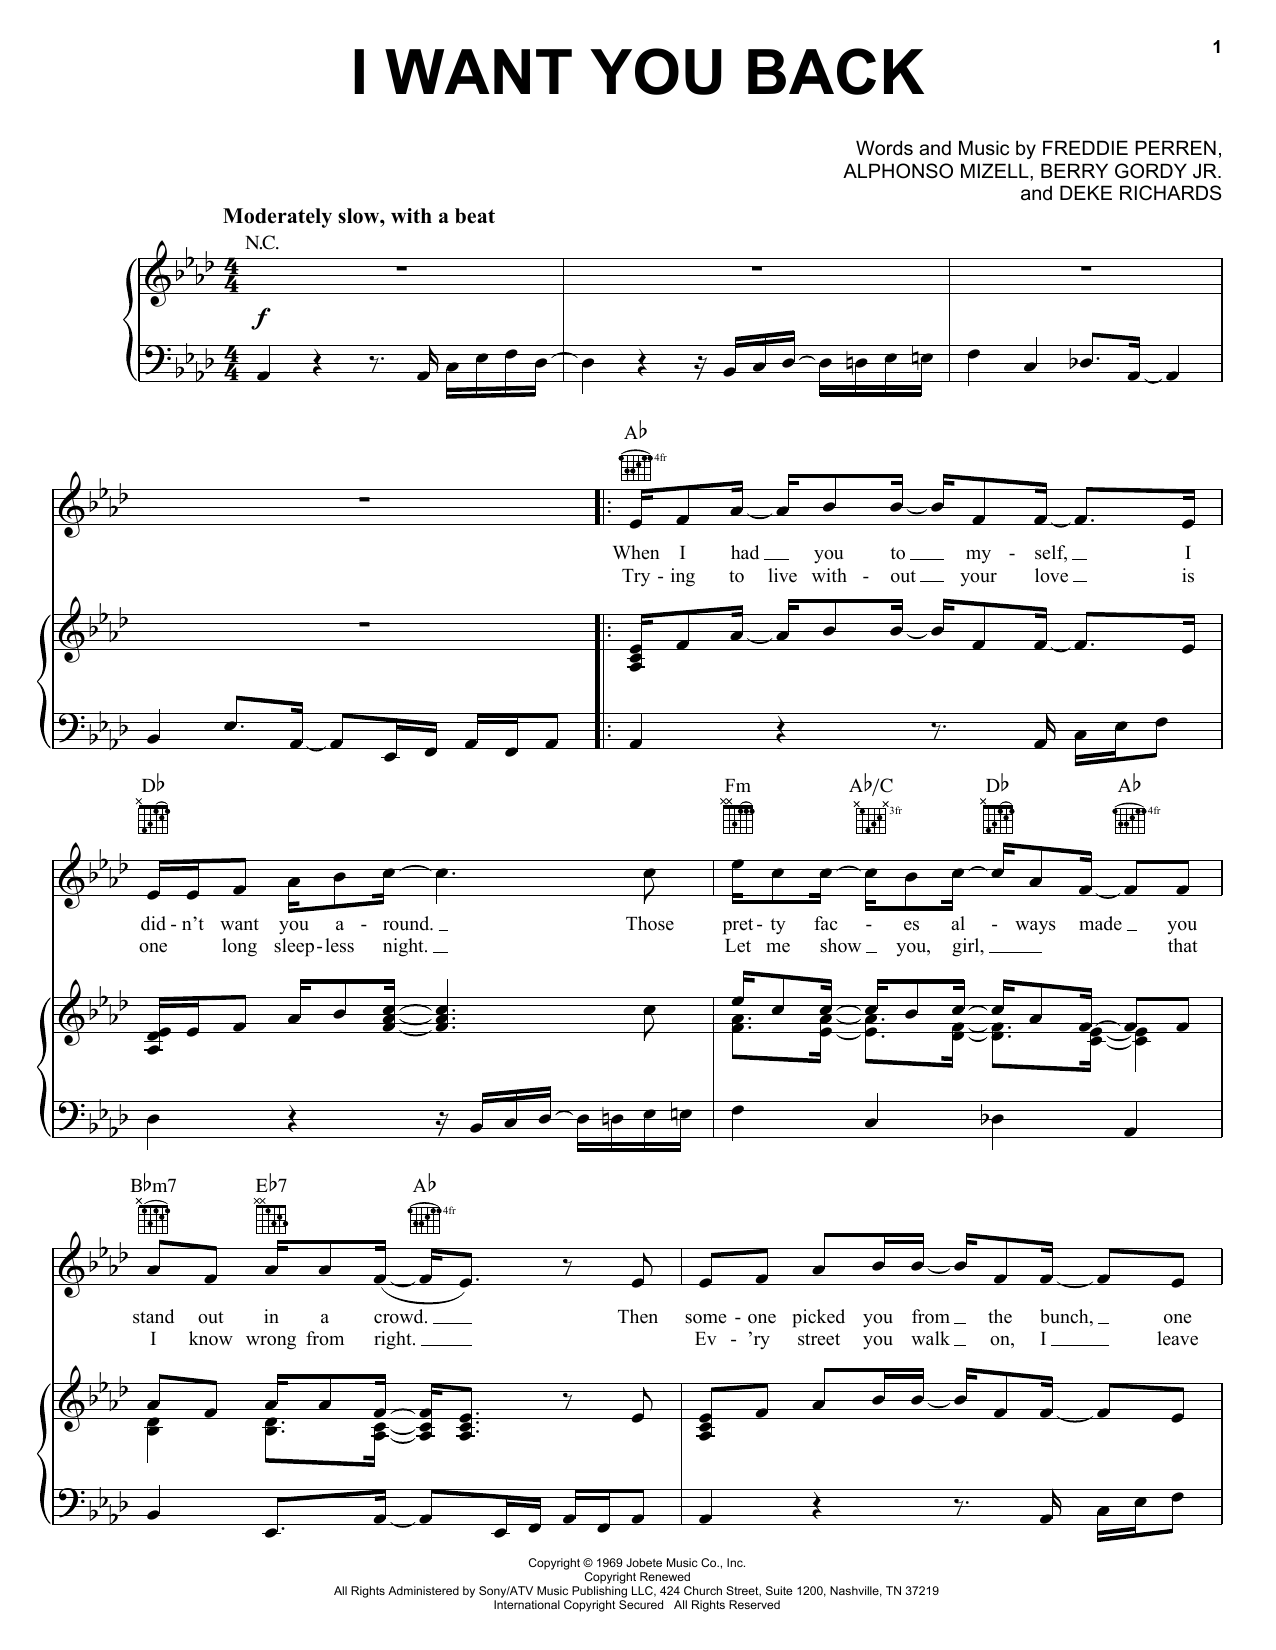 Download The Jackson 5 I Want You Back Sheet Music